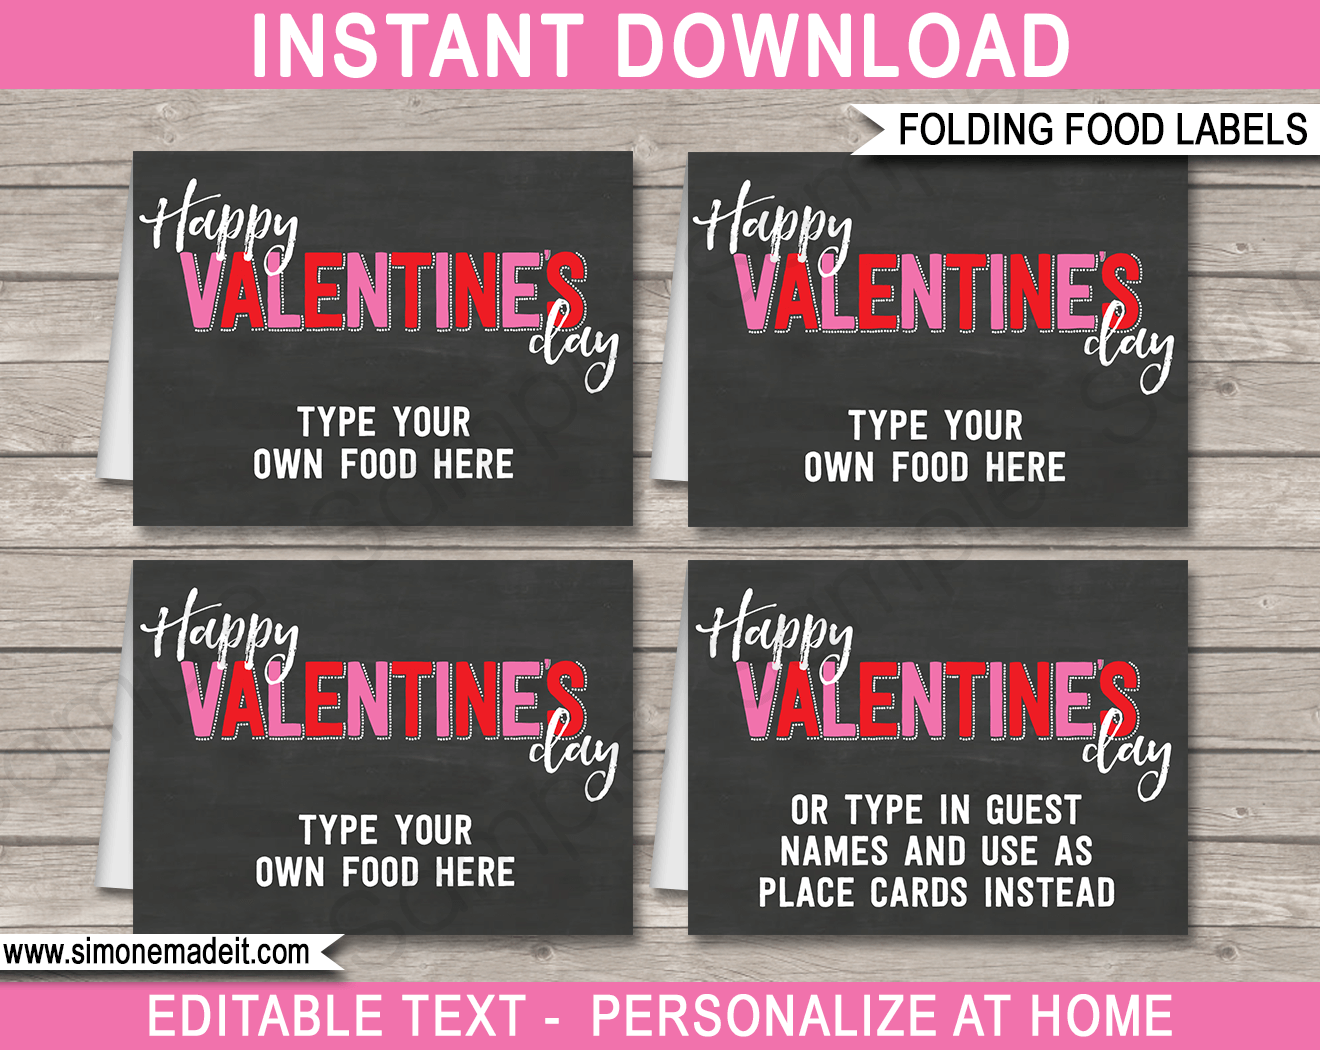 Valentine's Day Food Labels template | Placecards | Valentine's Day Theme Party Decorations | DIY Editable & Printable | INSTANT DOWNLOAD via simonemadeit.com